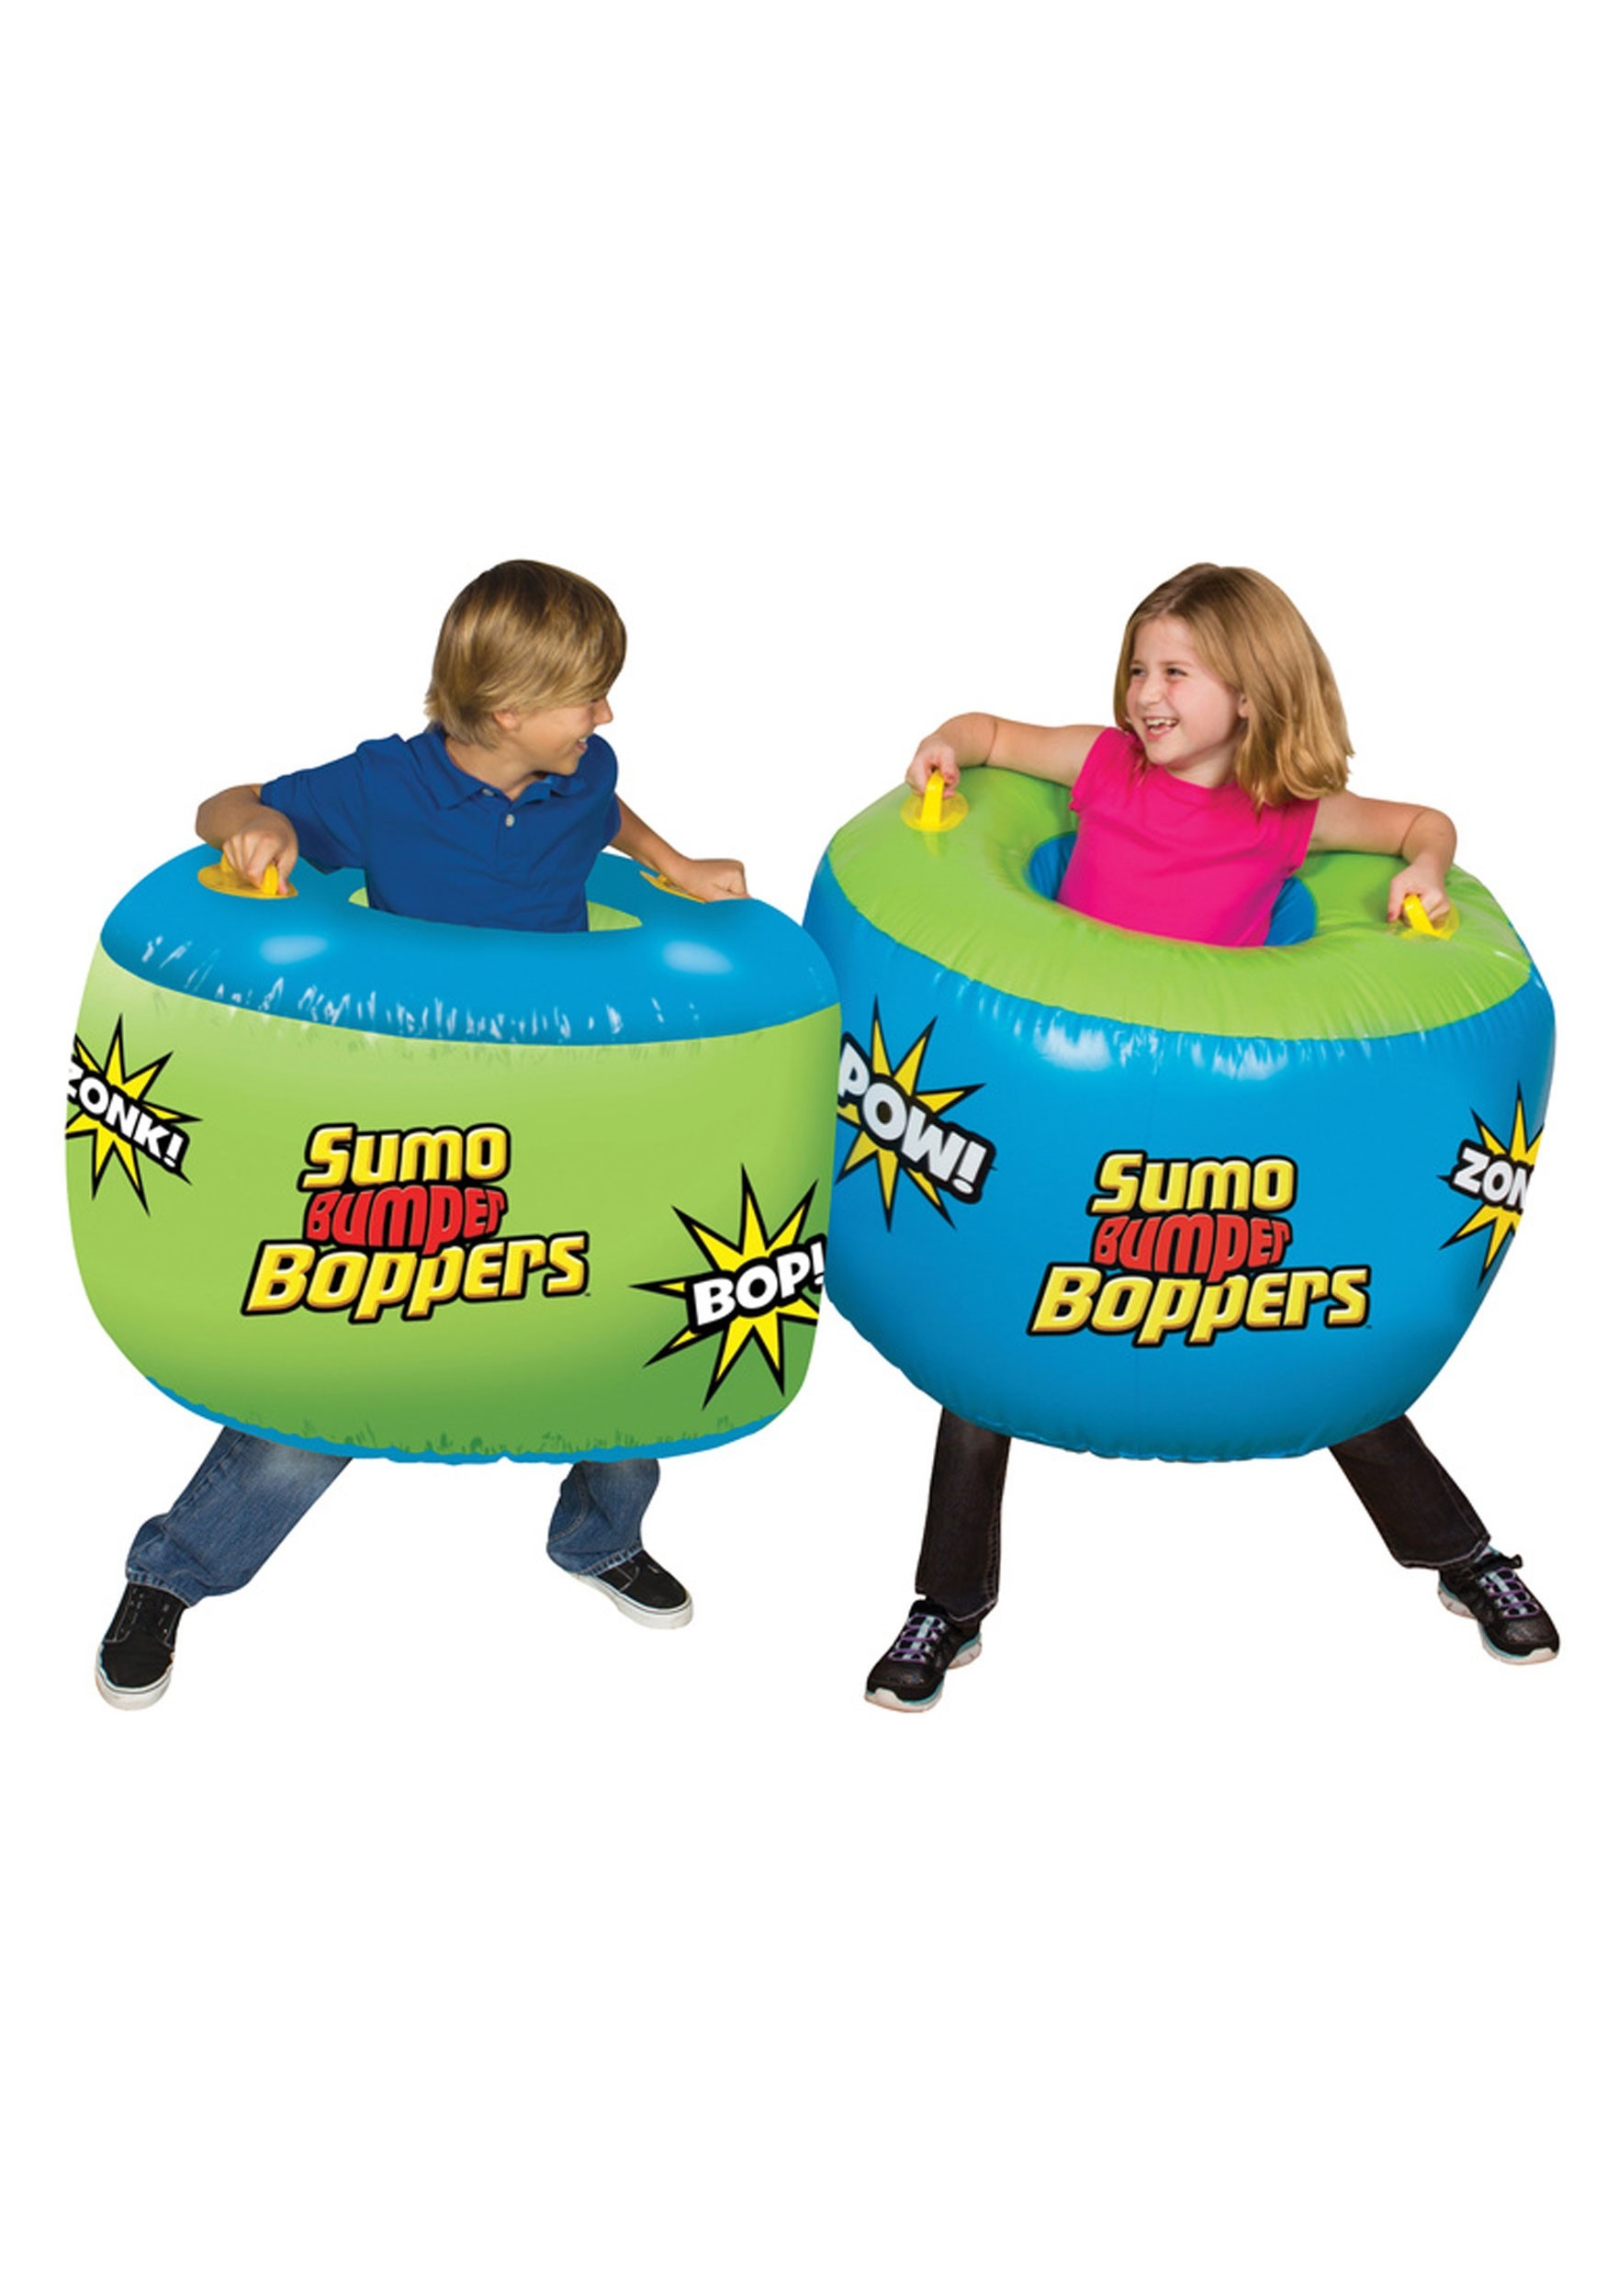 Schylling Toys Sumo Bumber Boopers